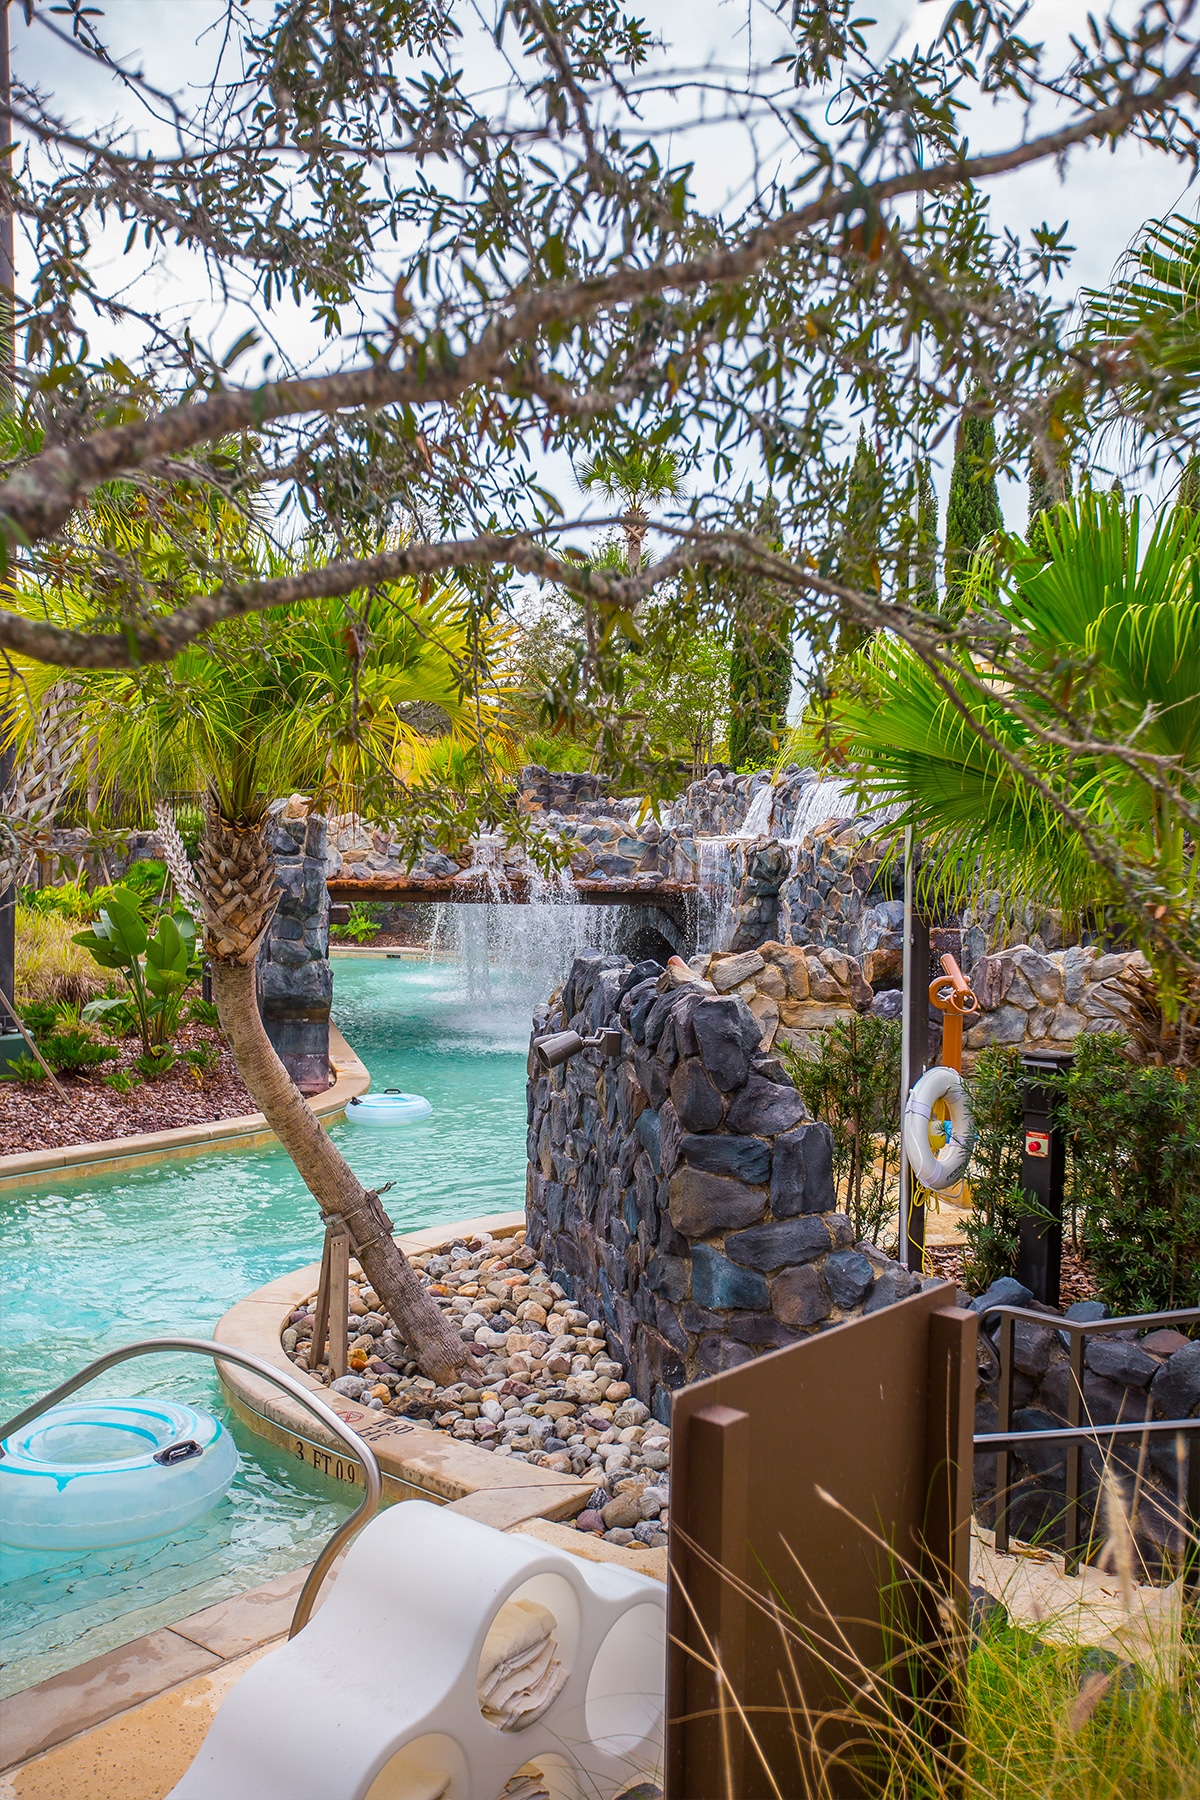 Four Seasons Resort - they have a lazy river and waterfall next to the kids pool!